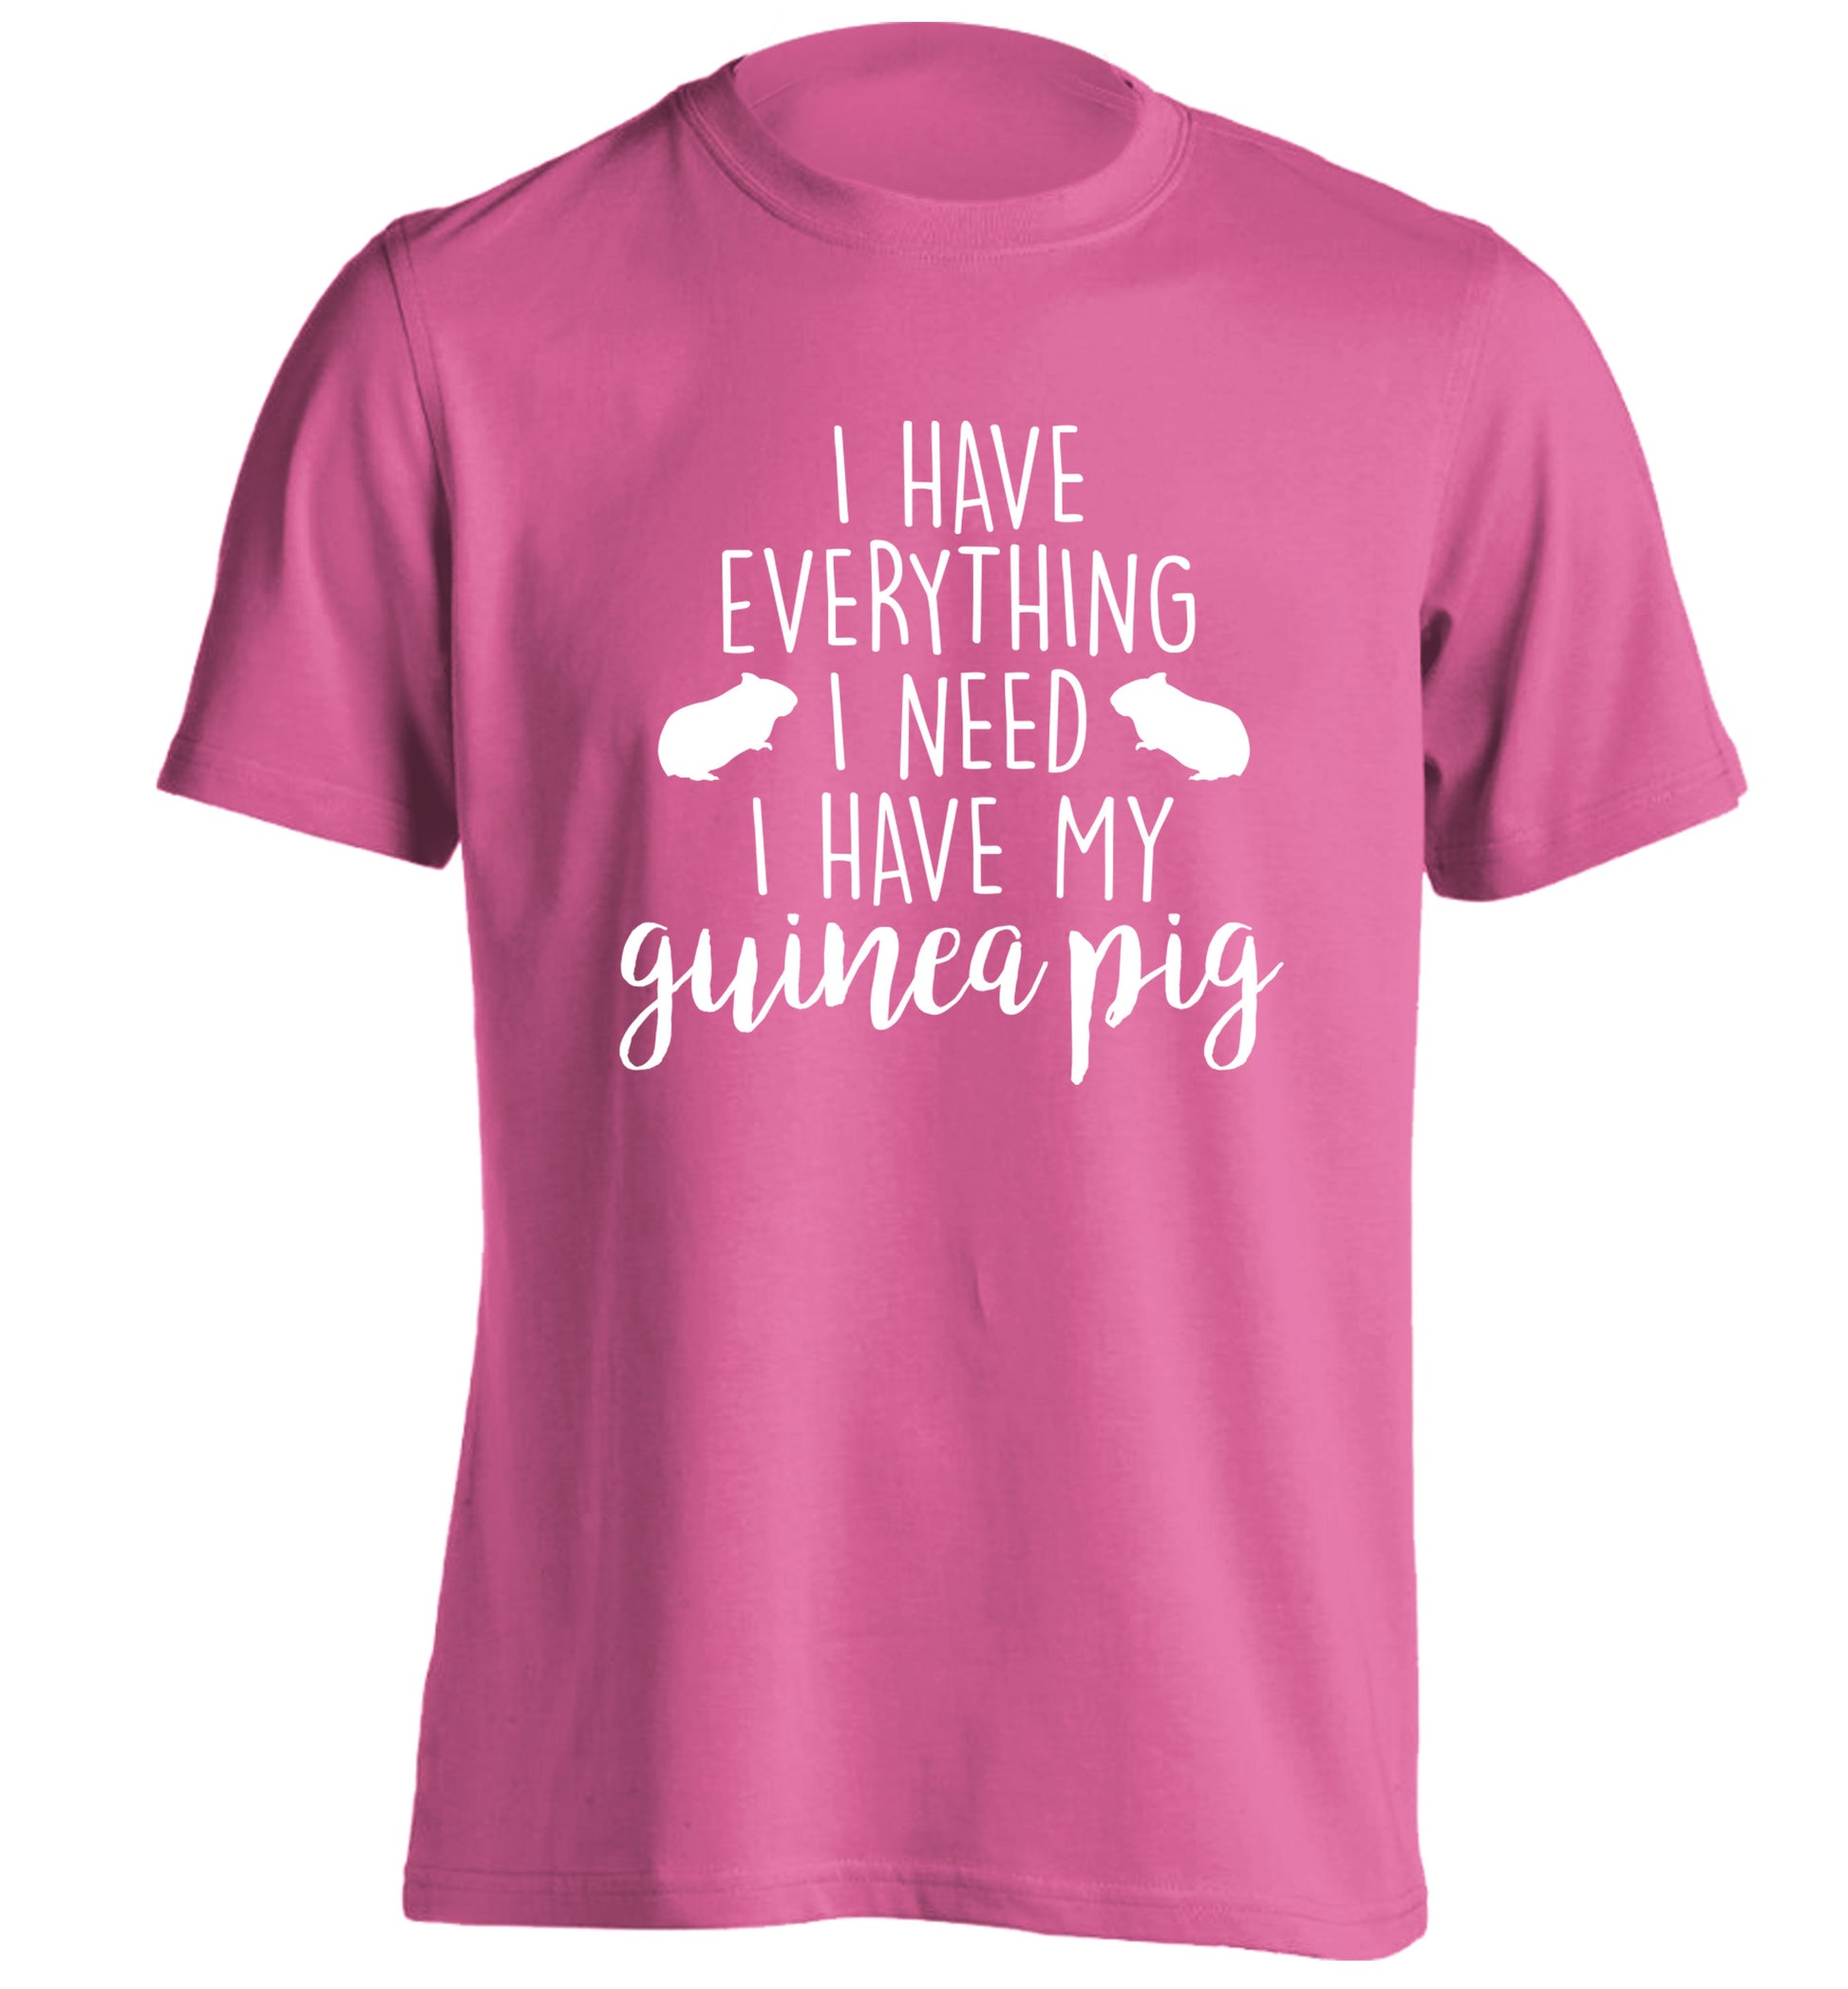 I have everything I need, I have my guinea pig adults unisex pink Tshirt 2XL